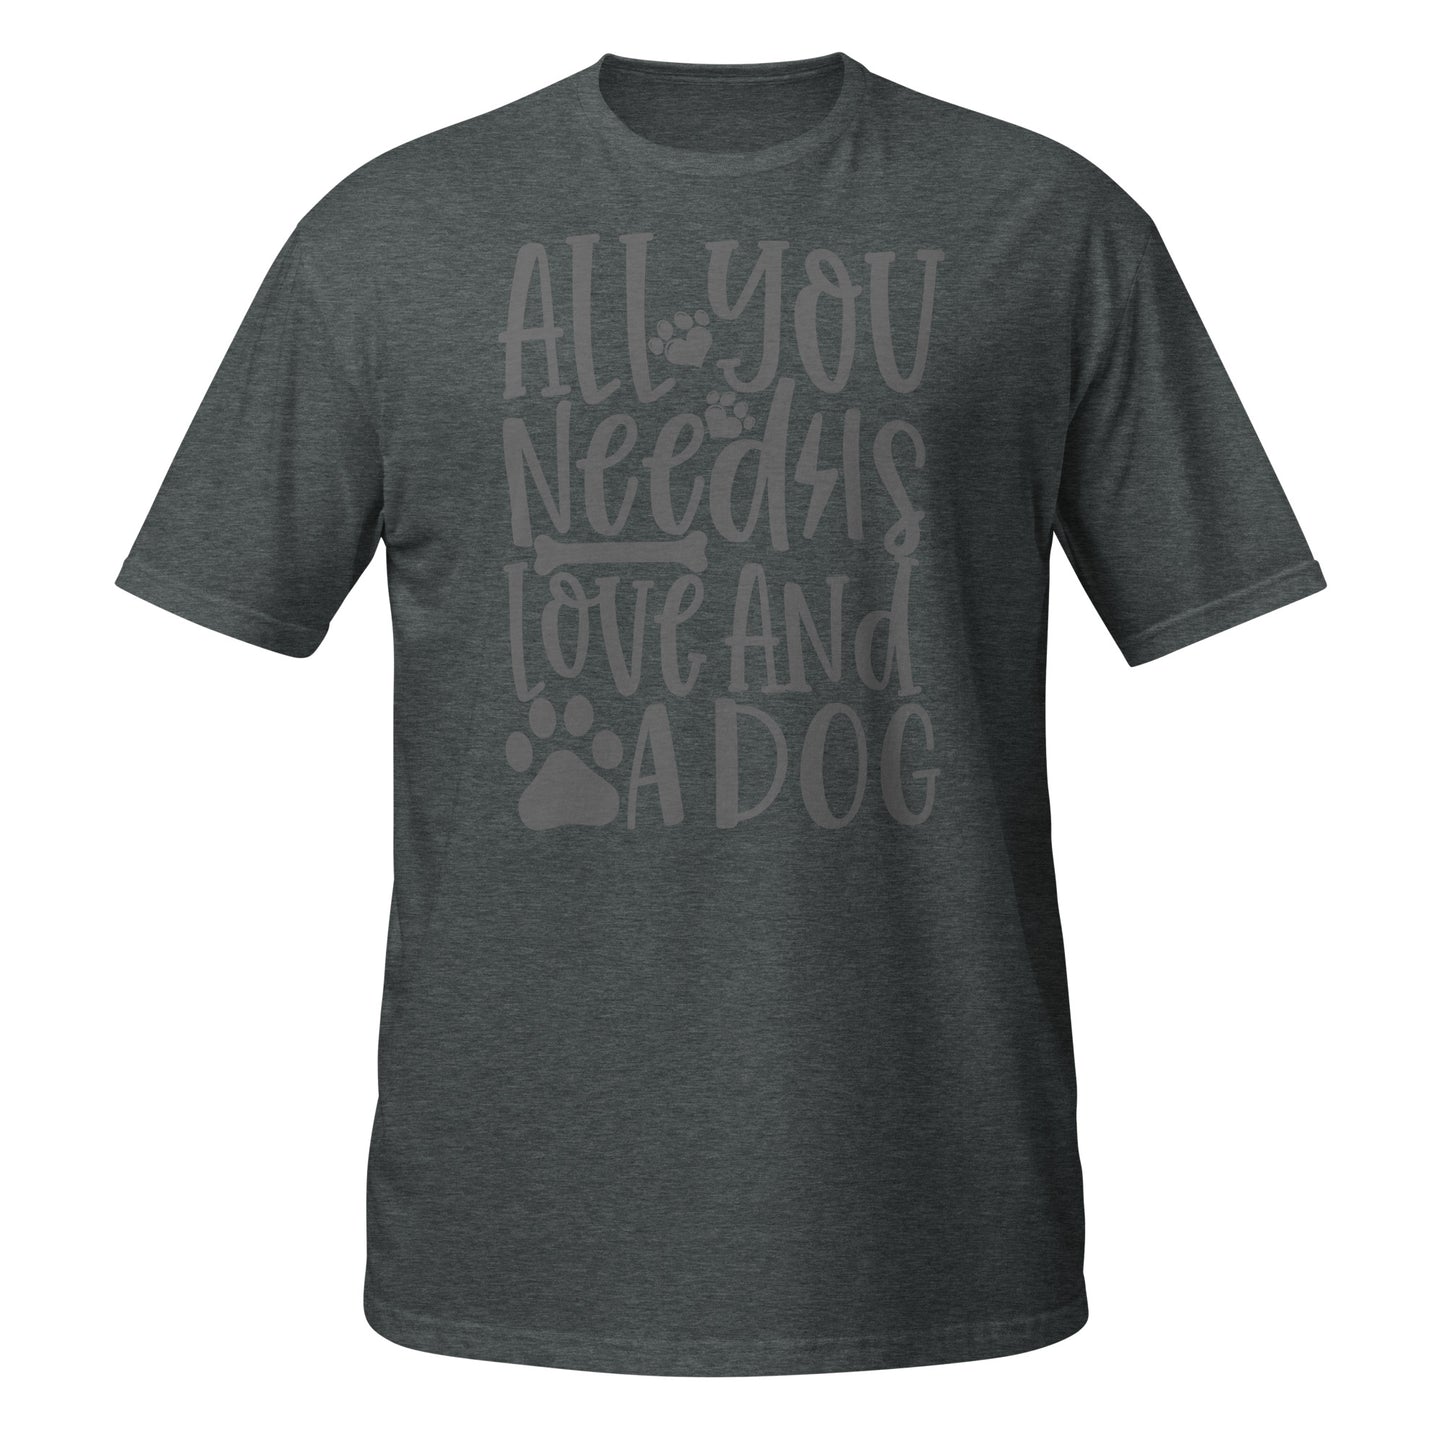 All You Need is Love And a Dog Unisex T-Shirt - Dog Lover Tee